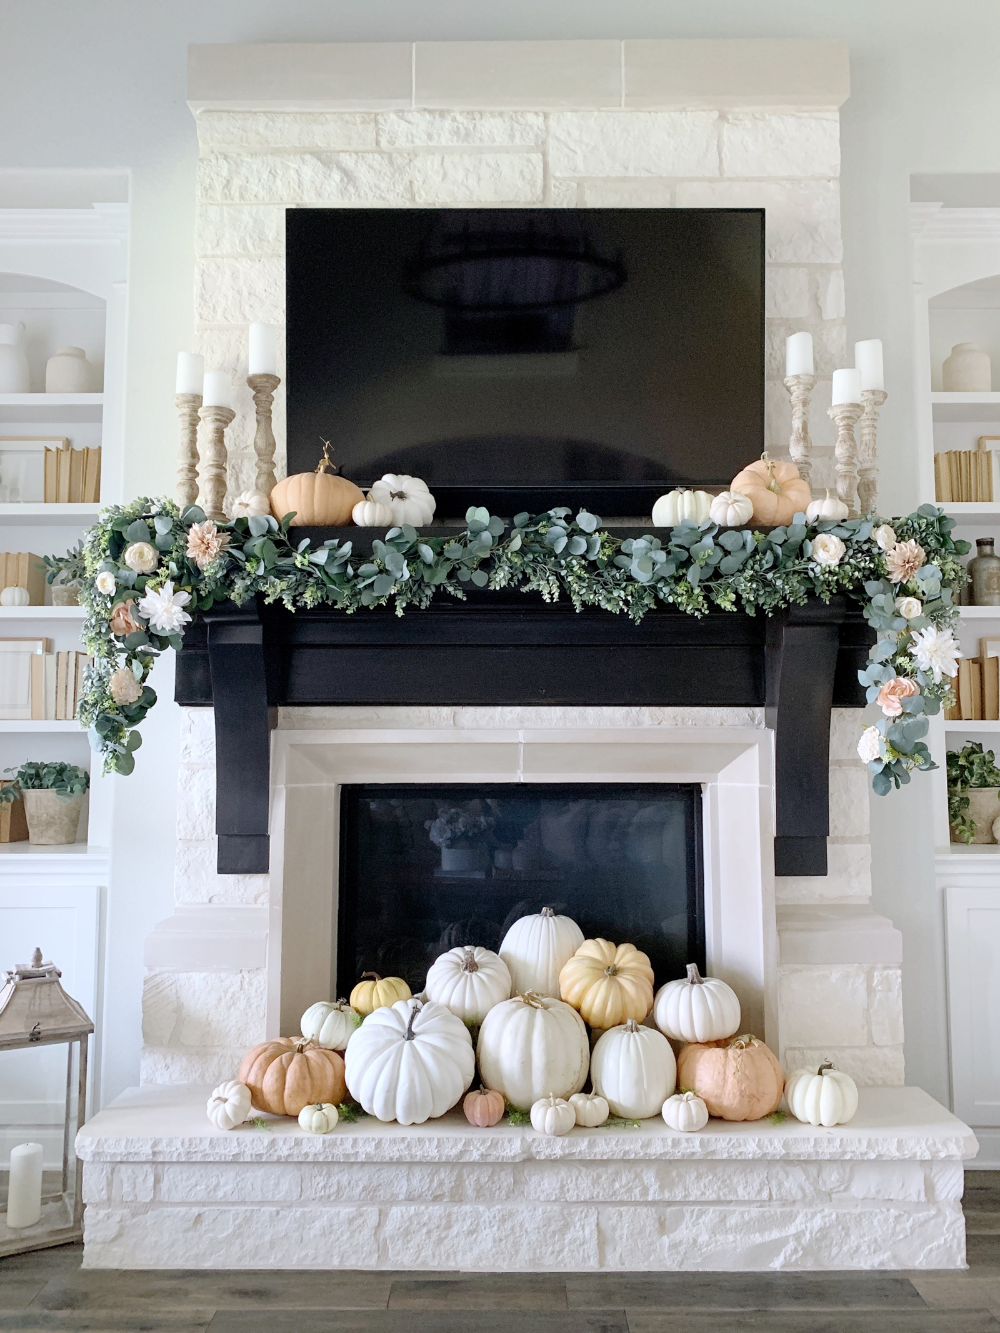 Mantel Decorating: A Holiday Tradition | Balsam Hill Blog -   18 thanksgiving decorations for home living rooms ideas